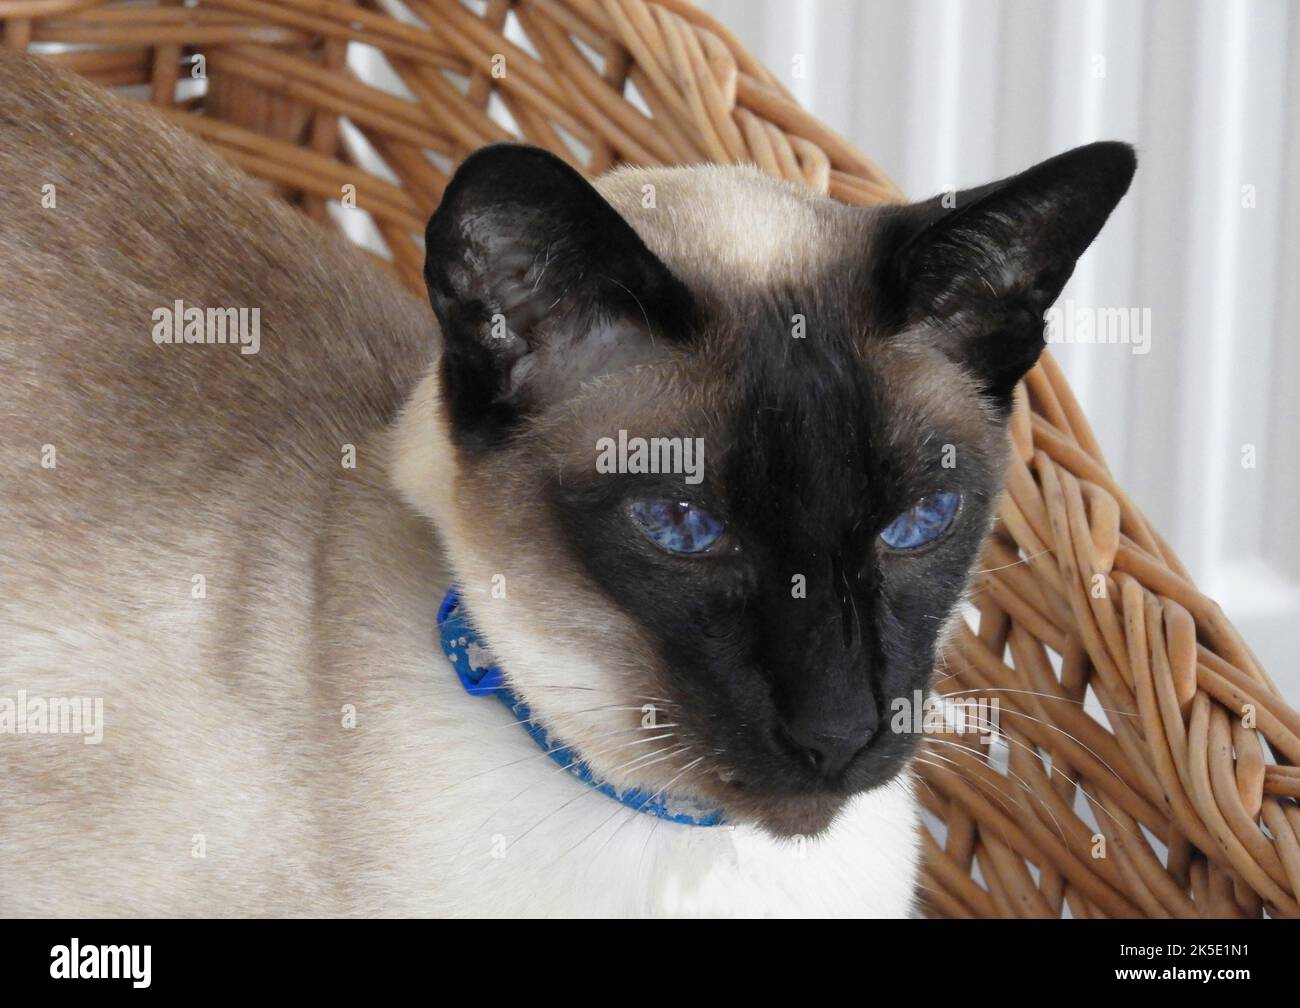 Seal point siamese cat with bright blue eyes in a wicker basket Stock Photo